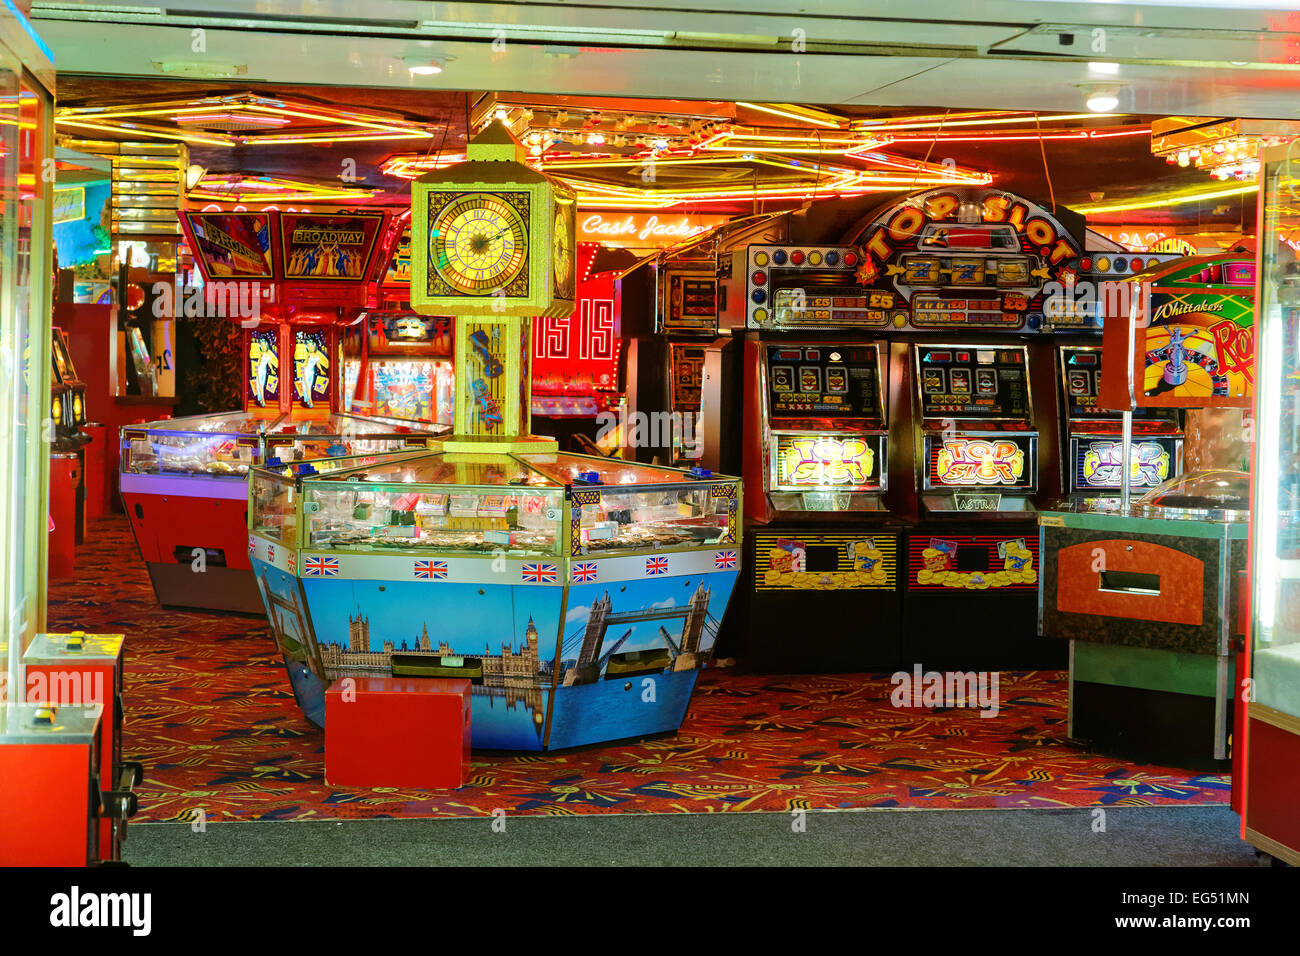 amusement arcades in Southend late at night Stock Photo